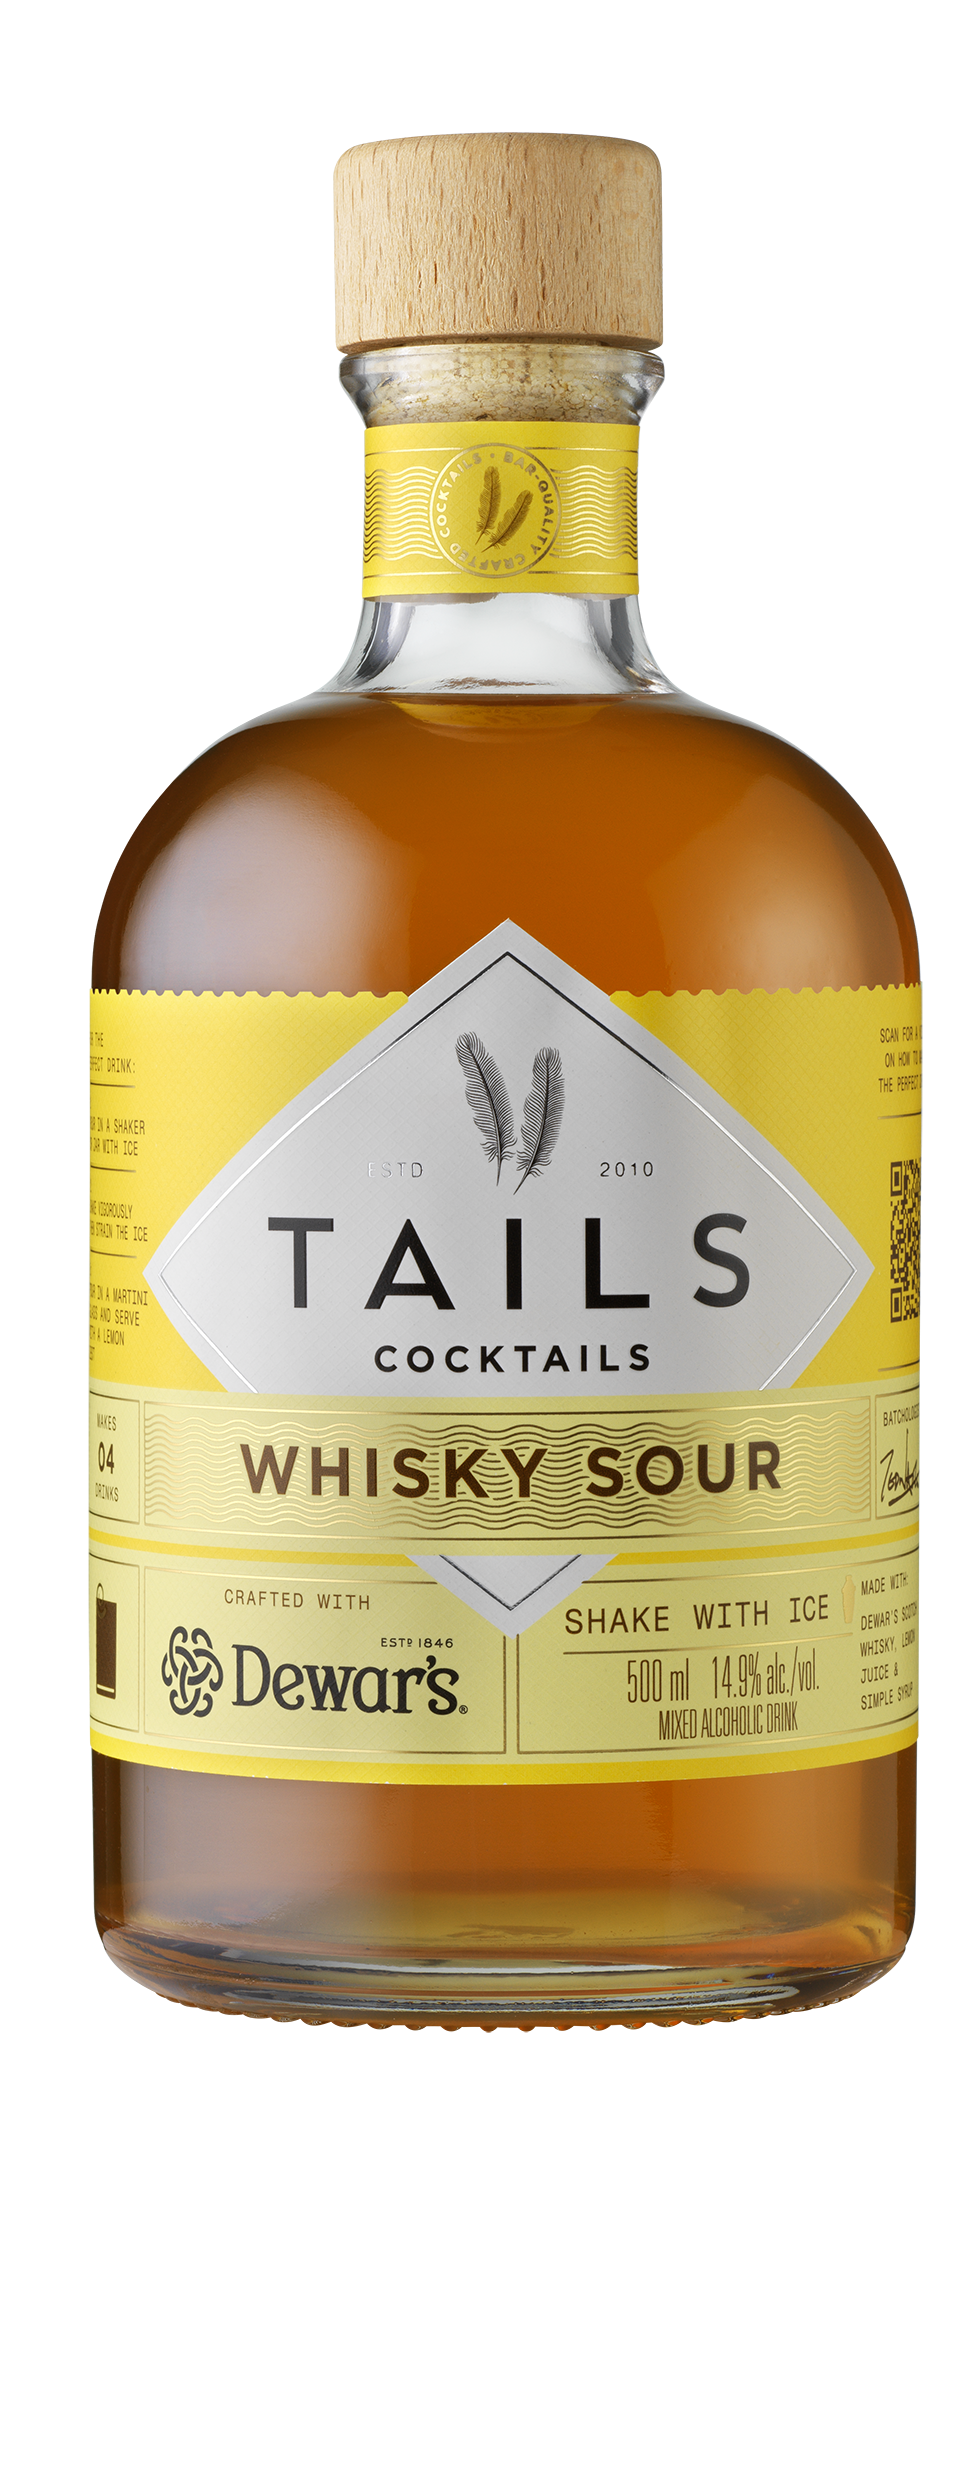 Tails Whiskey Sour 50cl Bottle